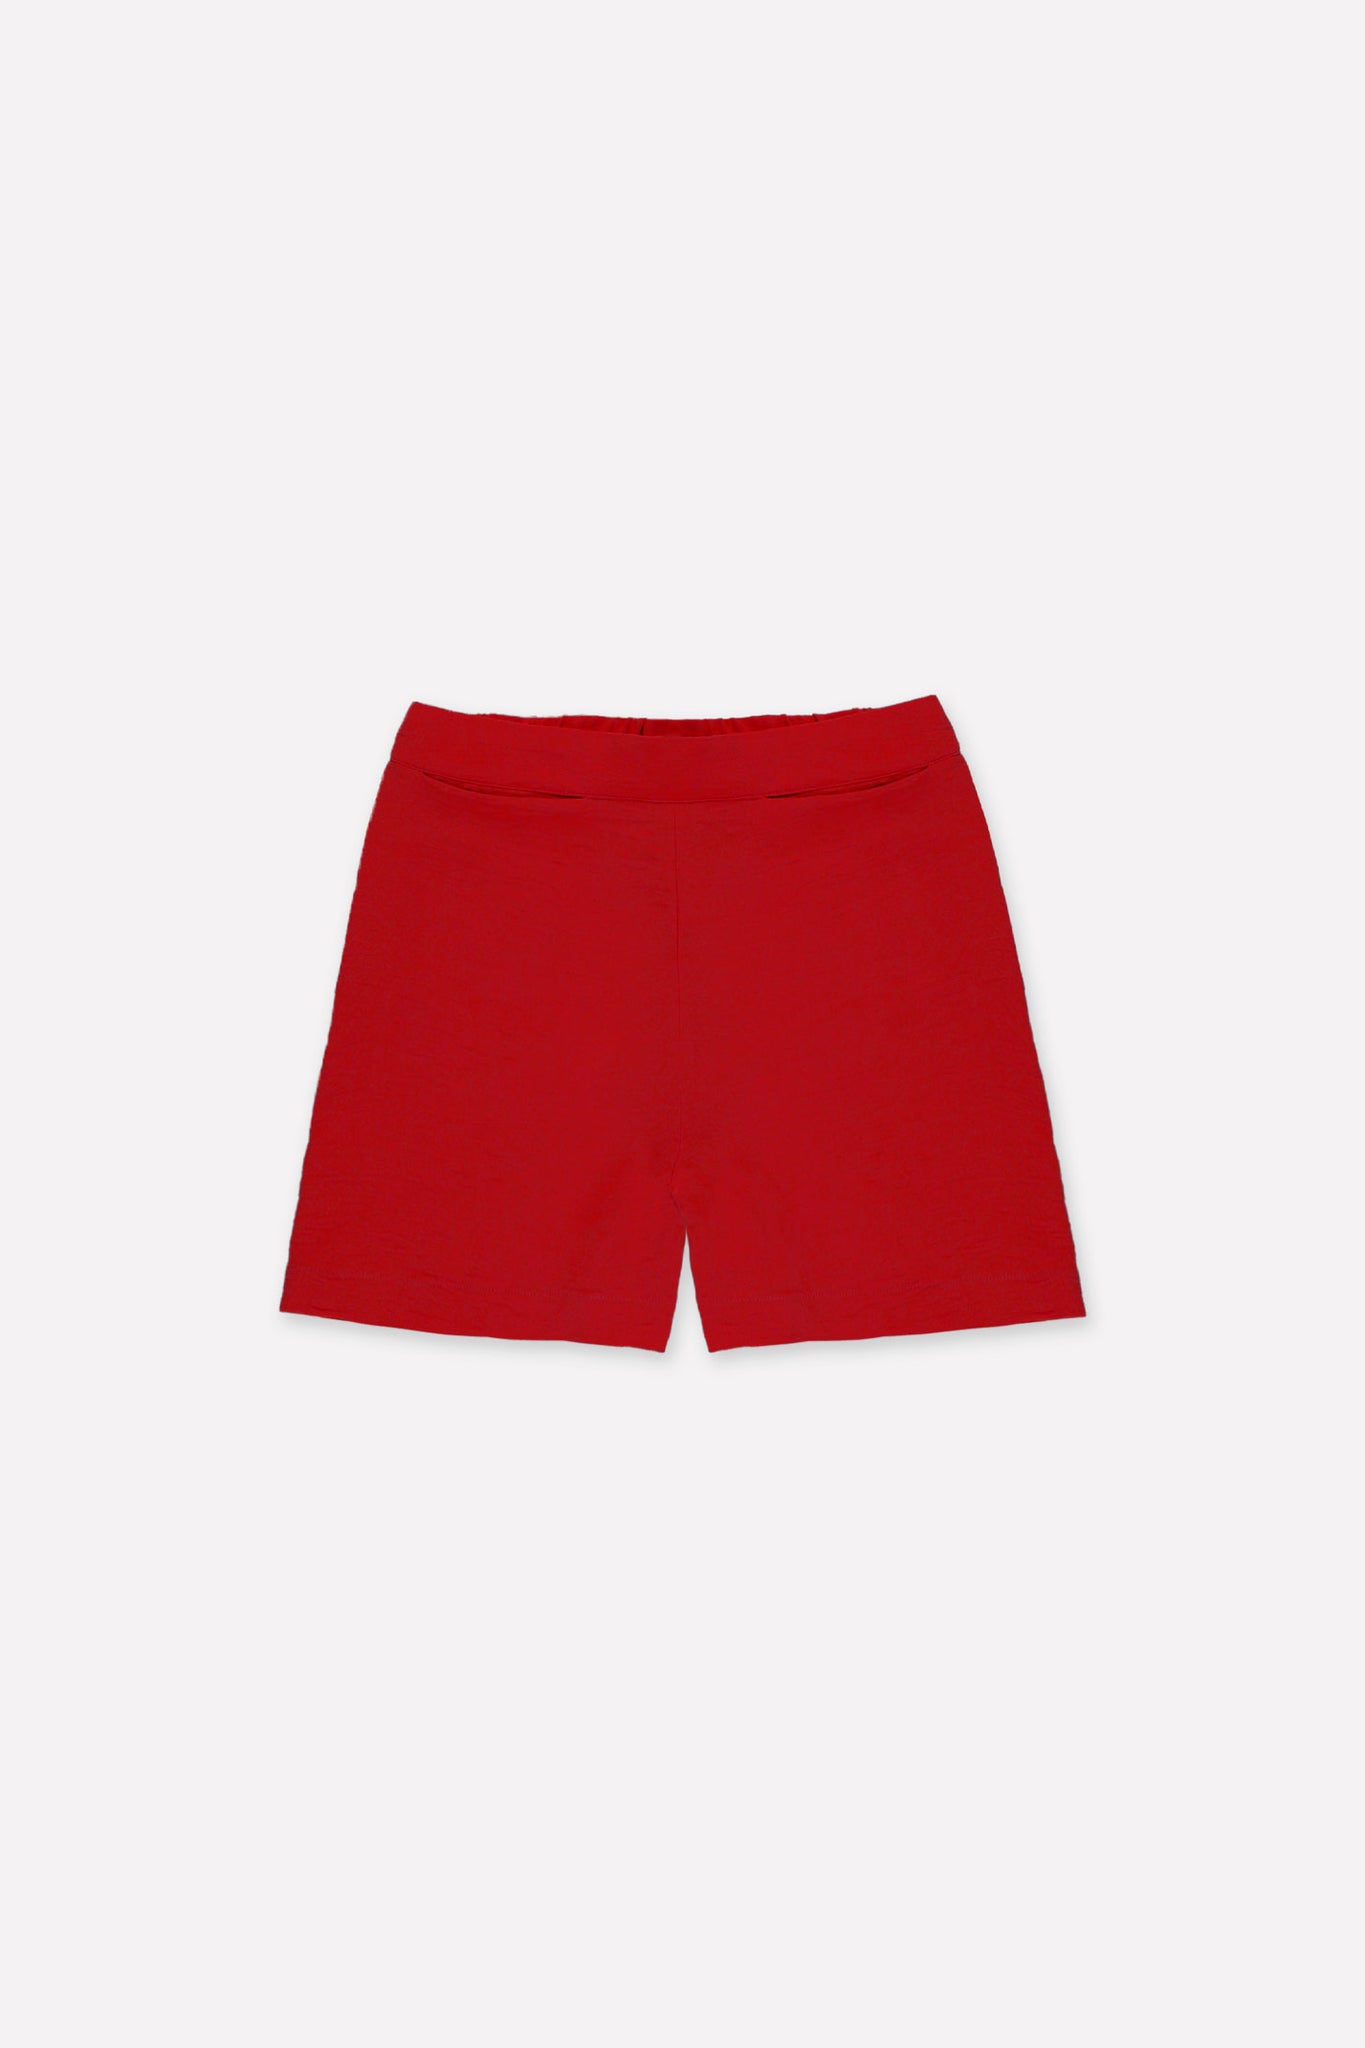 L.1195 - MOTION SHORTS - Red